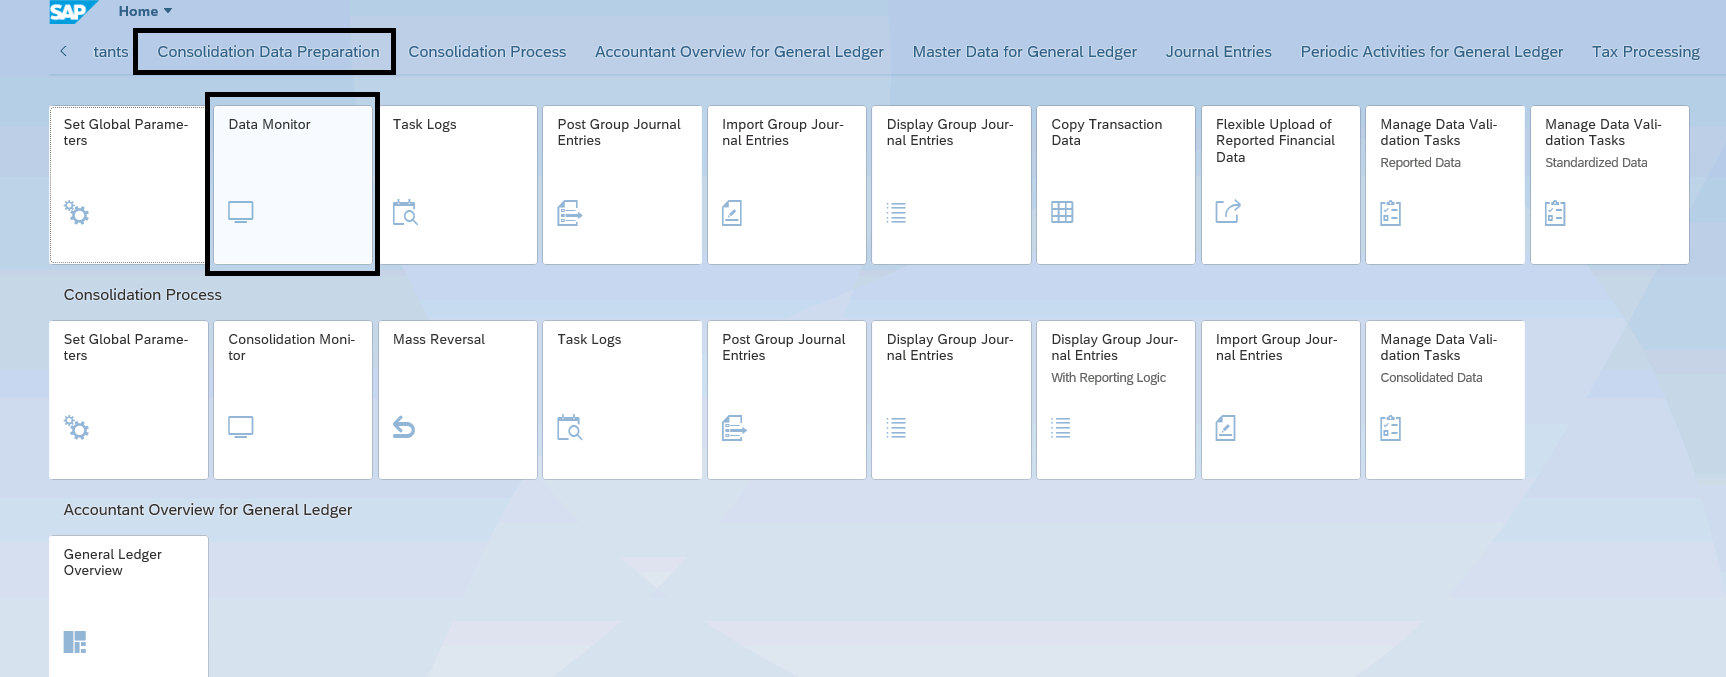 Figure 2— Accessing the Data Monitor from the Fiori Tile in the Consolidation Data Preparation